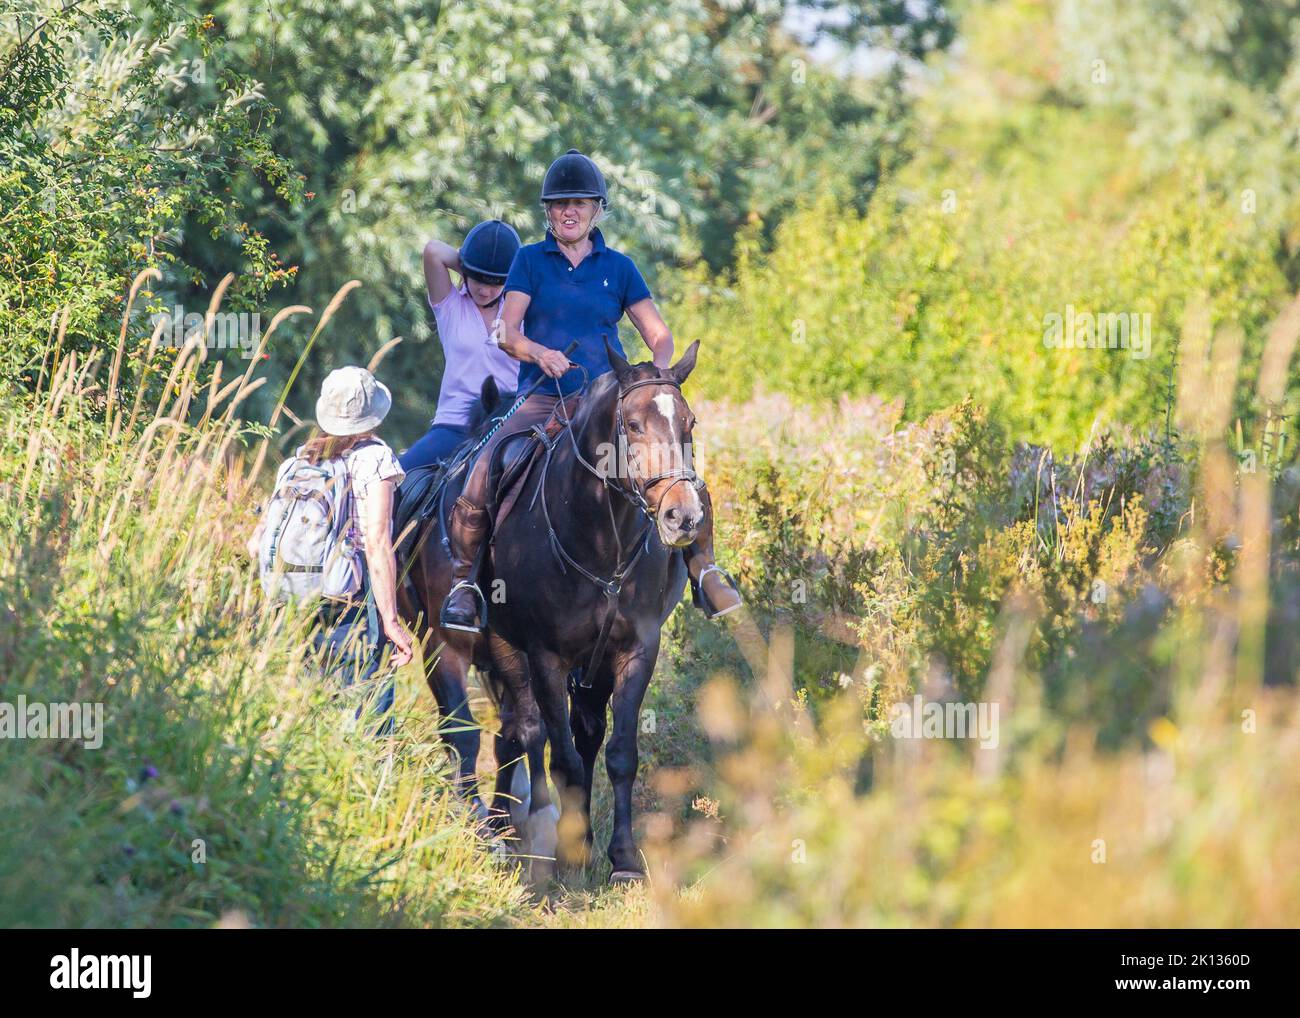 Front view of a smiling lady rider on a horse on a country path, bridleway chatting to a rambler outdoors on a hot summer day in rural England, UK. Stock Photo